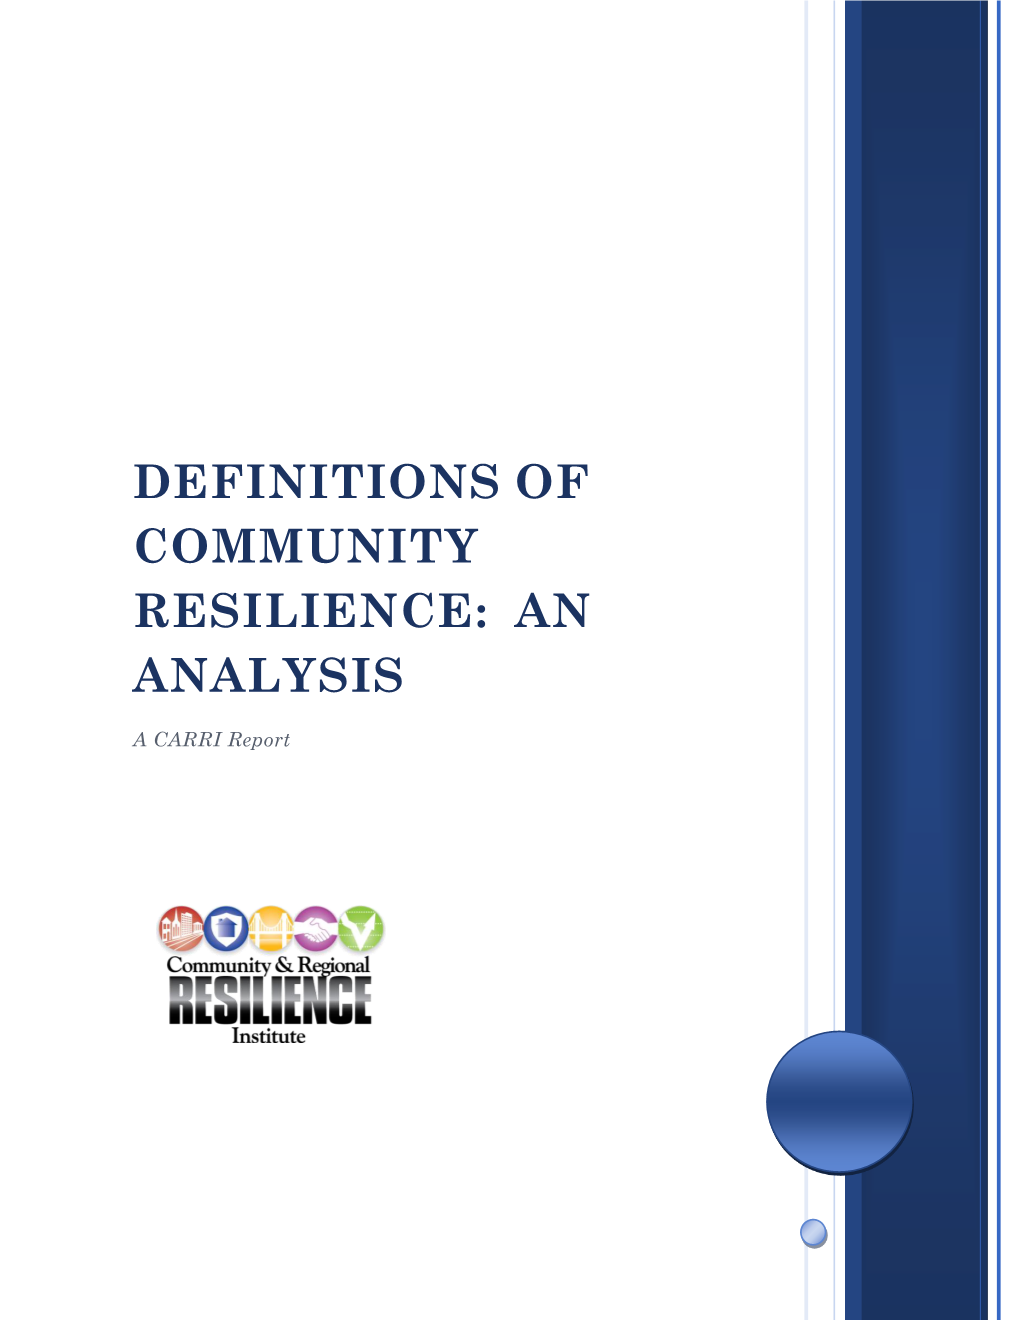 Definitions of Community Resilience: an Analysis